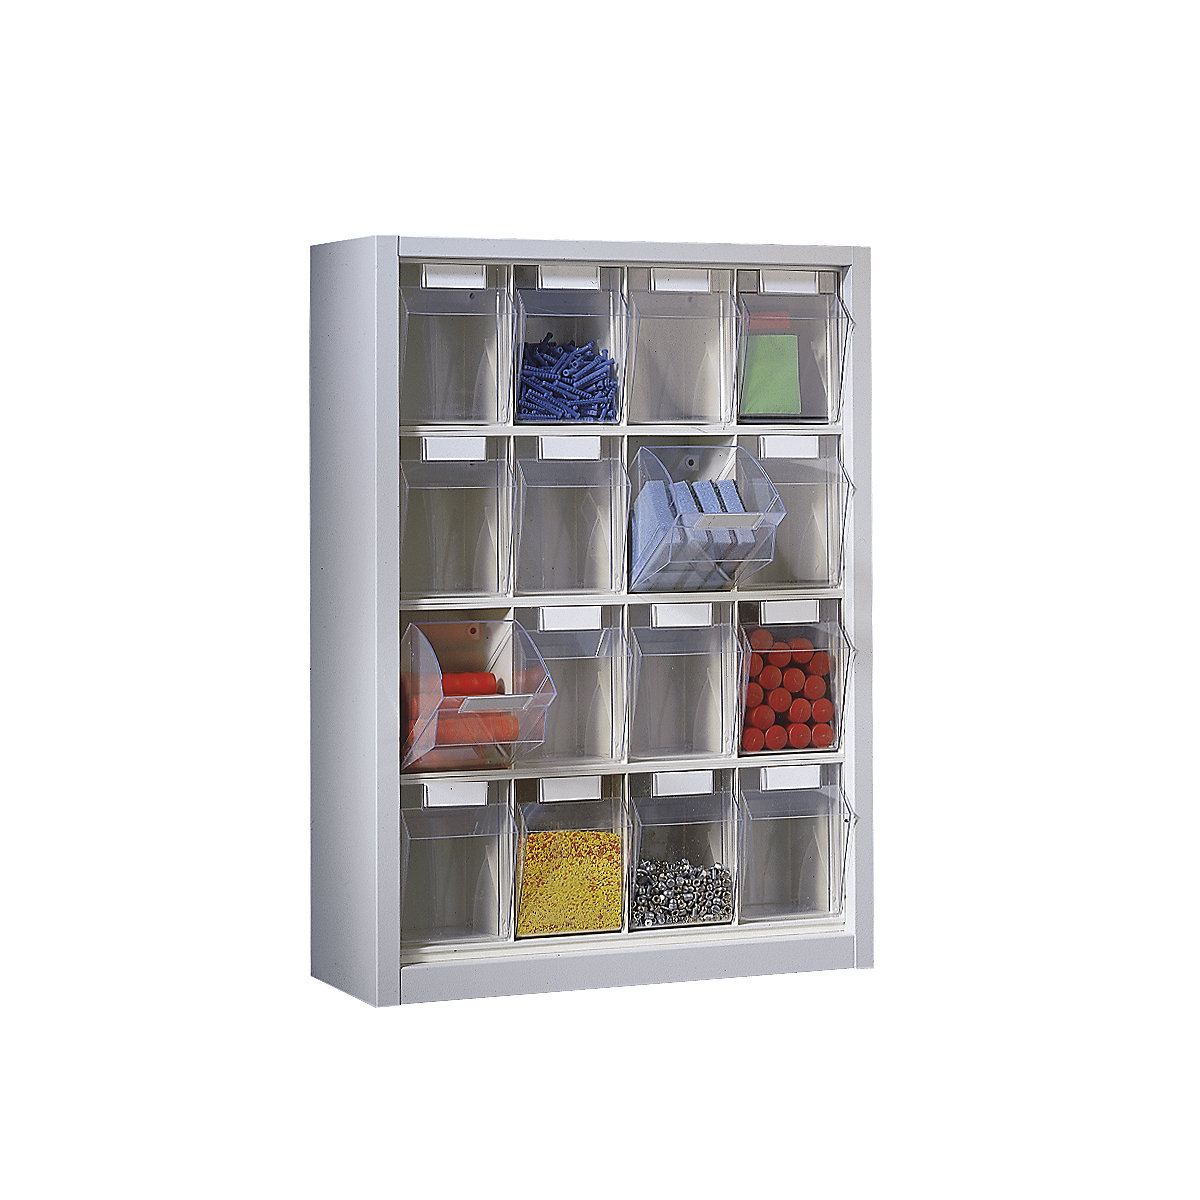 Wall mounted cupboard for visual storage containers, HxWxD 910 x 665 x 250 mm, with 16 bins, light grey housing-2